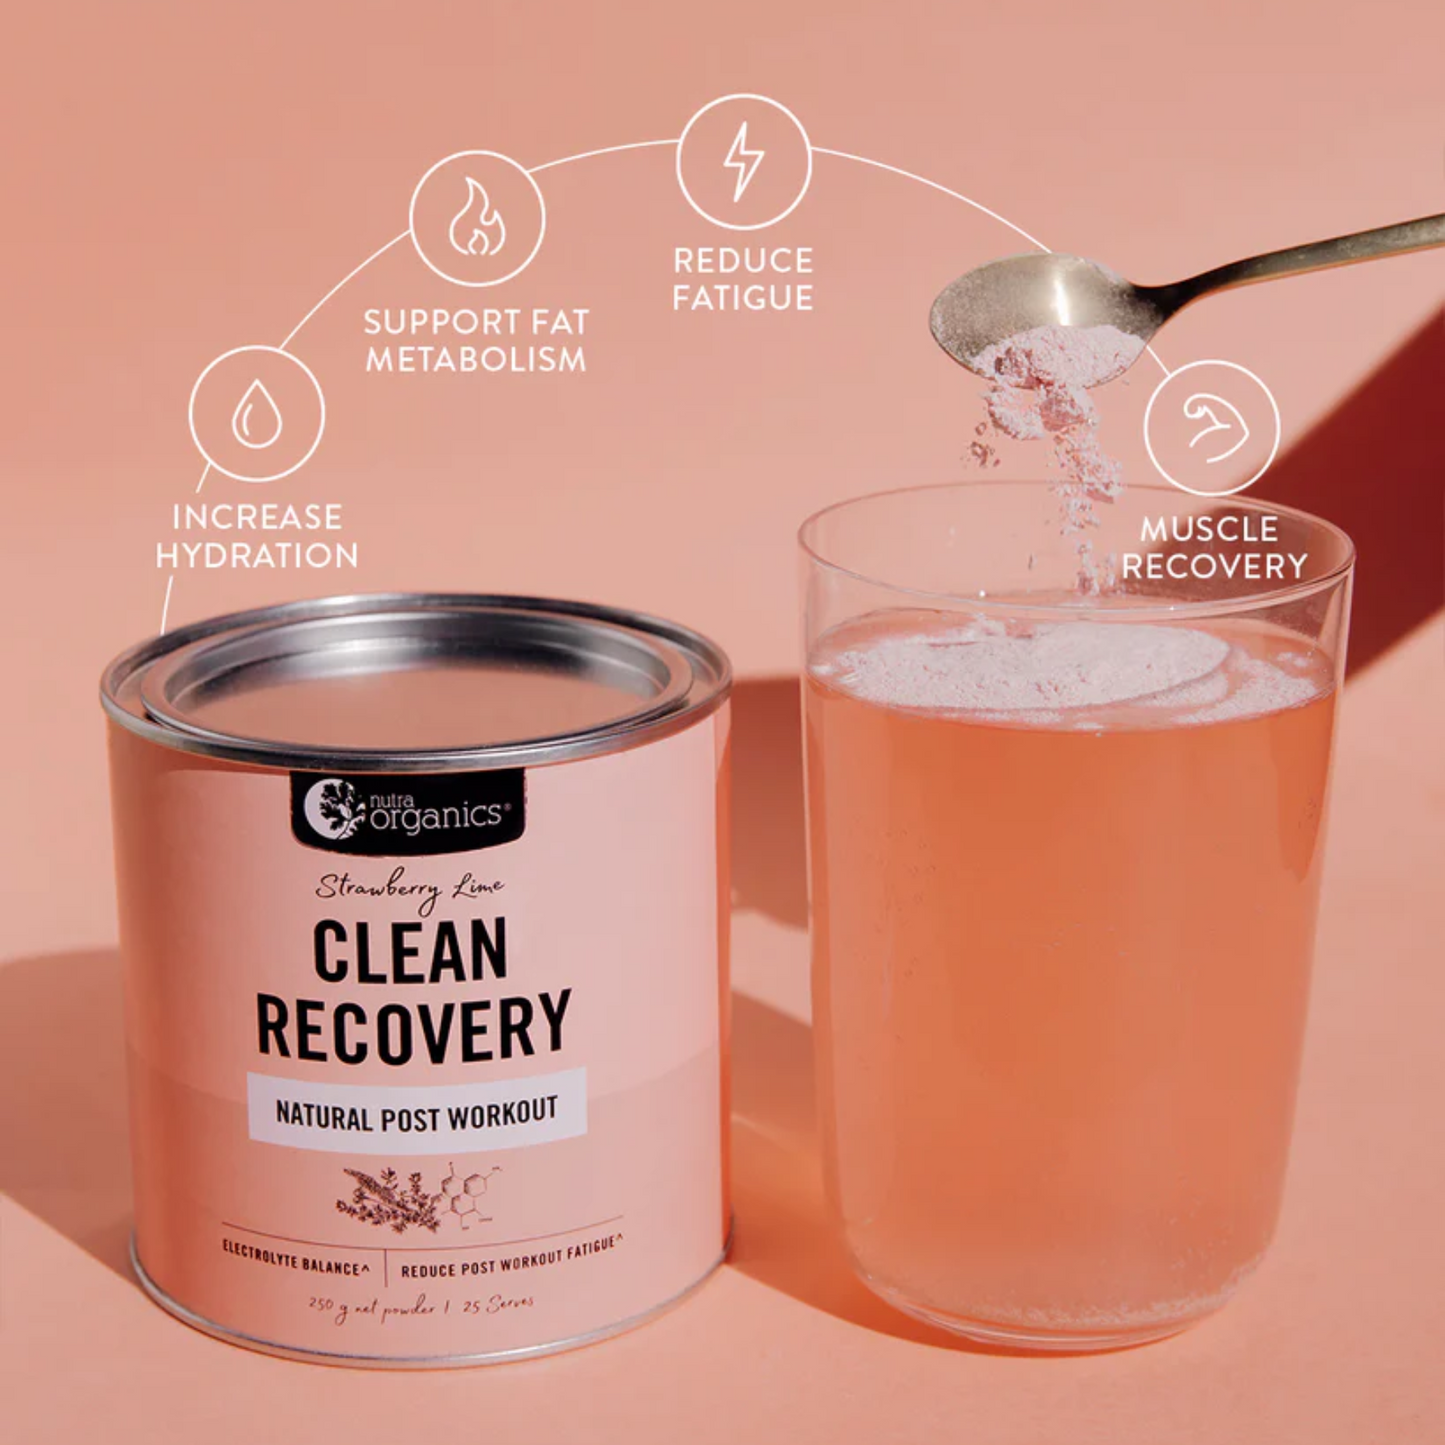 Nutra Organics Clean Recovery 250g, Natural Post-Workout Strawberry Lime Flavour